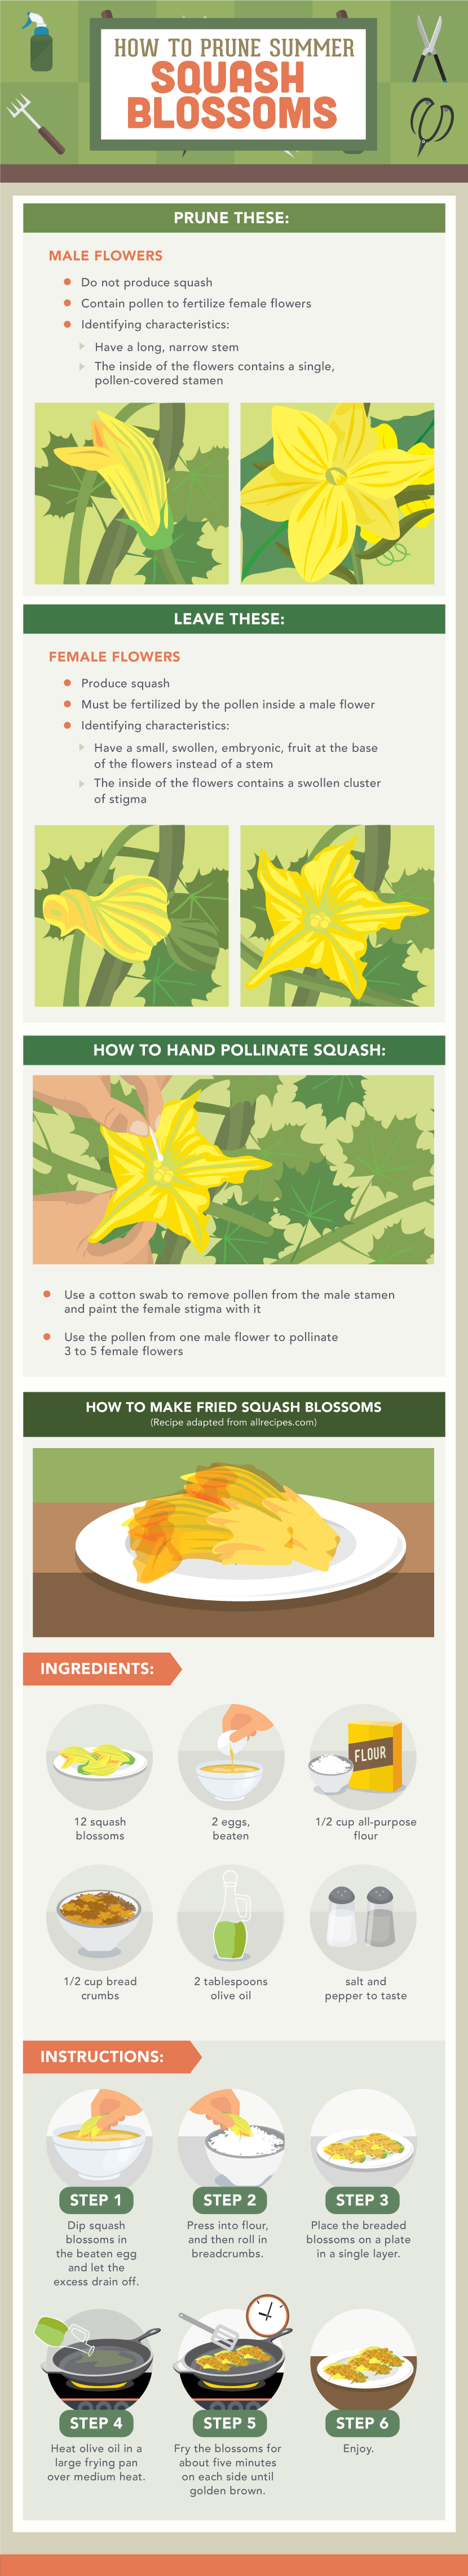 How to Prune Summer Squash Blossoms - Vegetable Pruning Guide